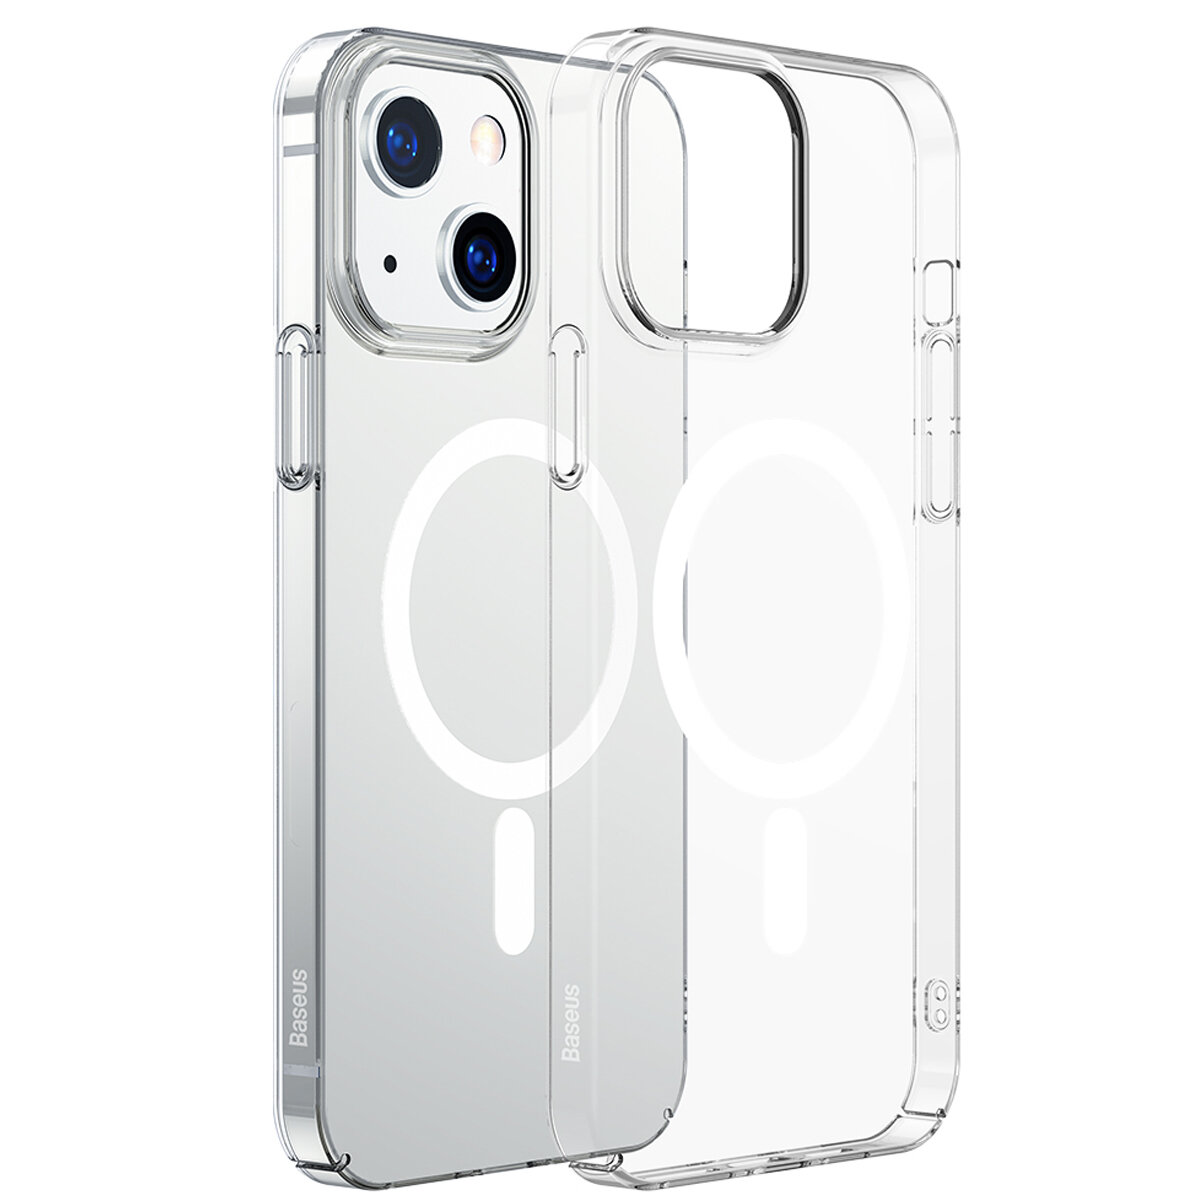 

Baseus for iPhone 13/ 13 Pro/ 13 Pro Max Case Support Magnetic Charging Ultra Thin High Transparency Anti-Fingerprint Sh